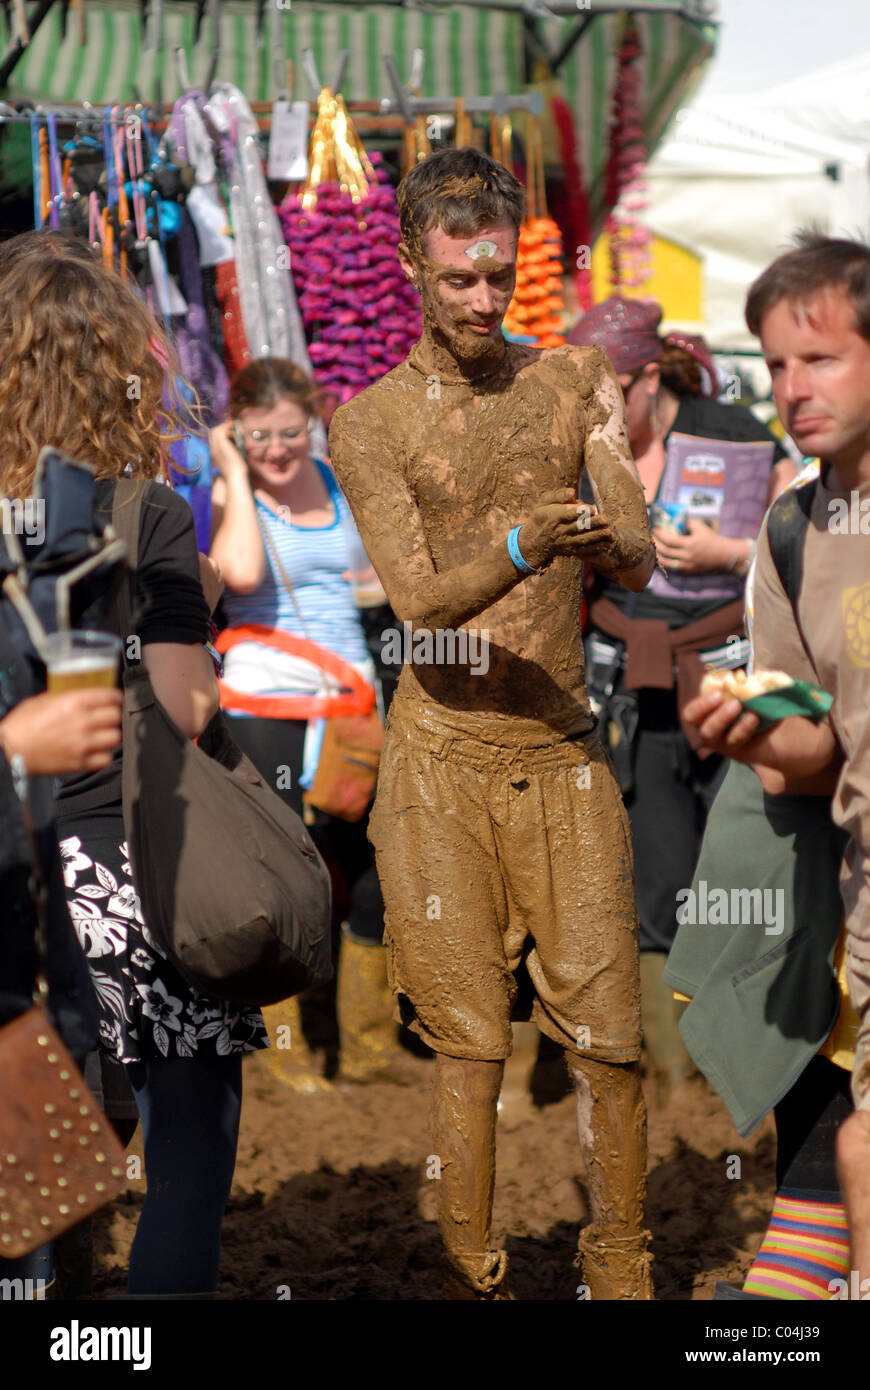 Young man covered in mud and dancing at WOMAD Festival, Malmesbury ...